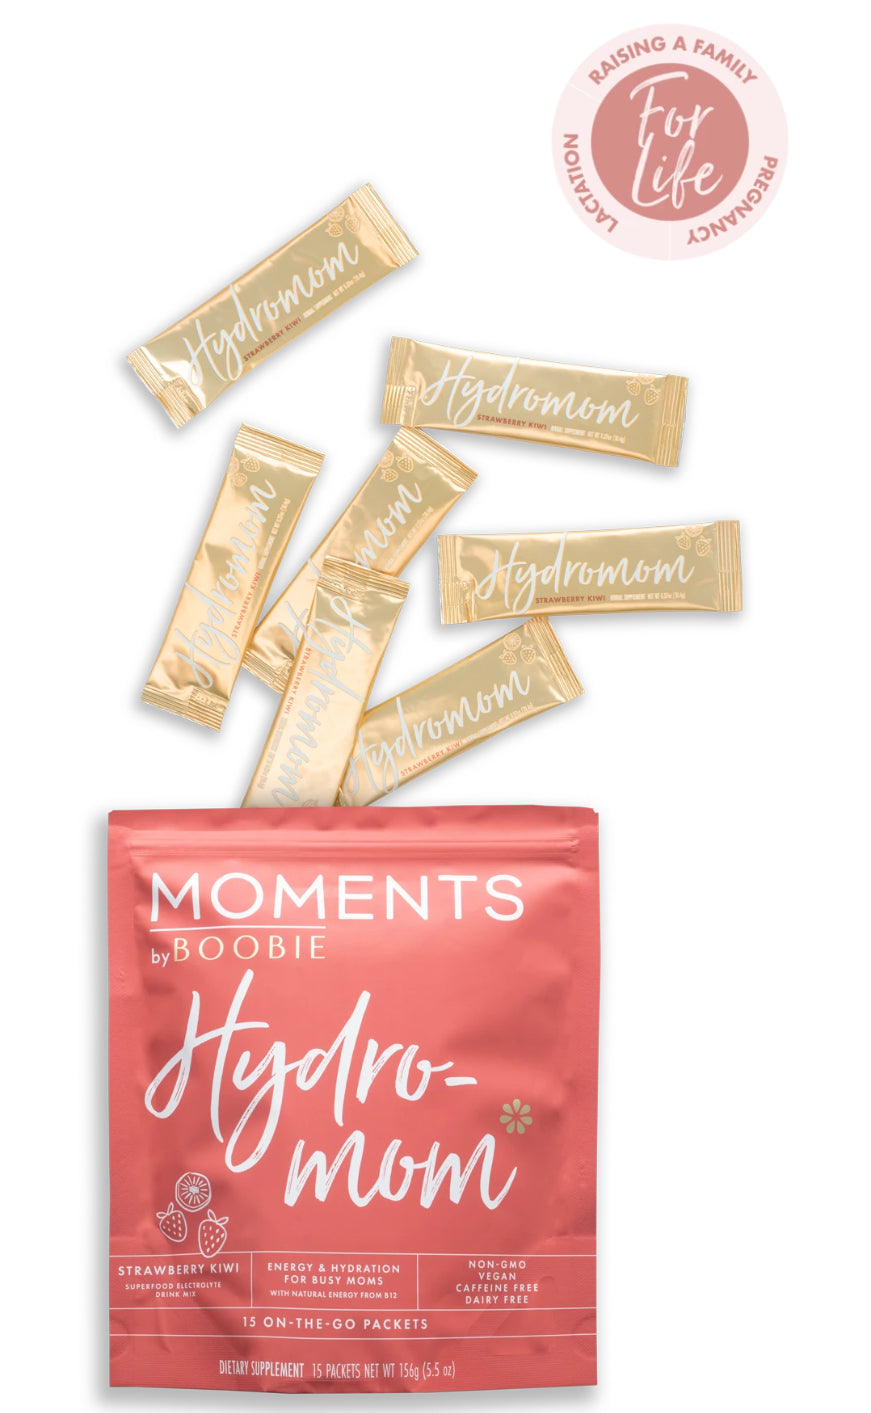 MOMENTS BY BOOBIE | HYDRO MOM